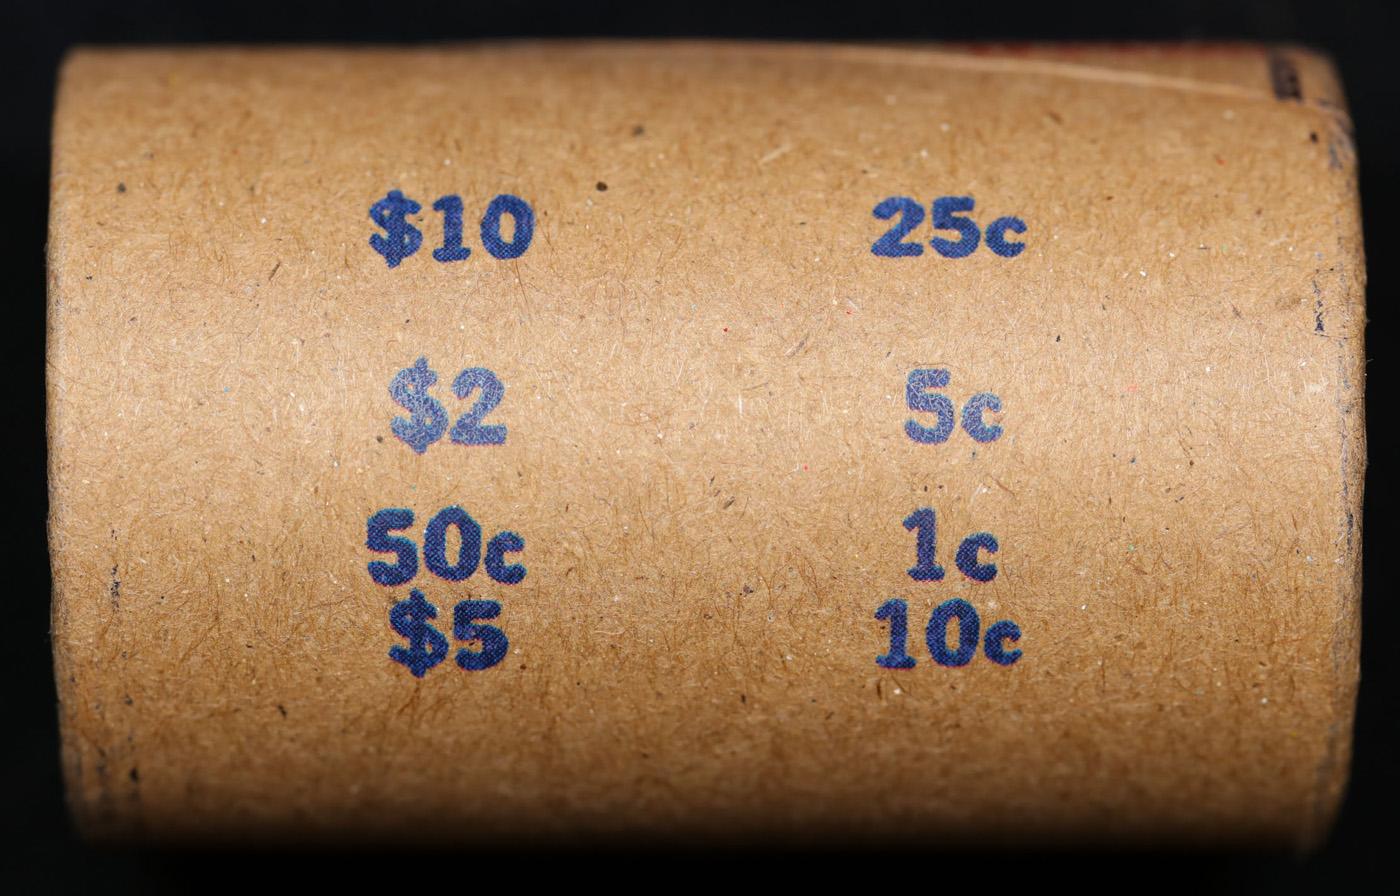 *EXCLUSIVE* x20 Mixed Covered End Roll! Marked "Morgan/Peace Limited"! - Huge Vault Hoard  (FC)